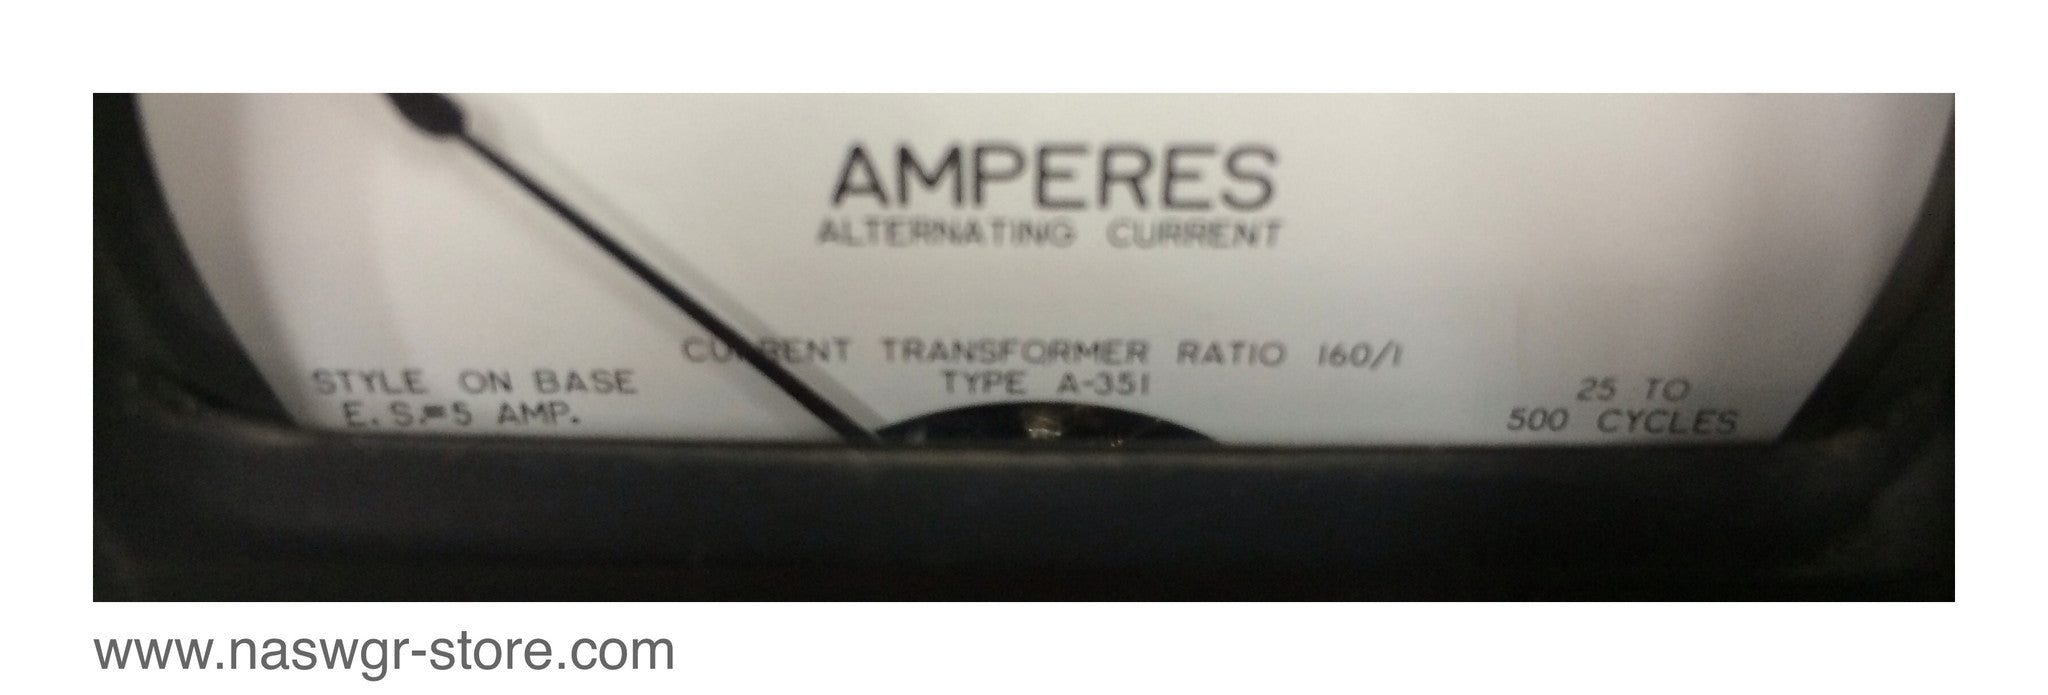 A-351 , Westinghouse A-351 Amperes Meter , 0-800 , Current Transformer Ratio 160/1 , 25-500 Cycles , A-351